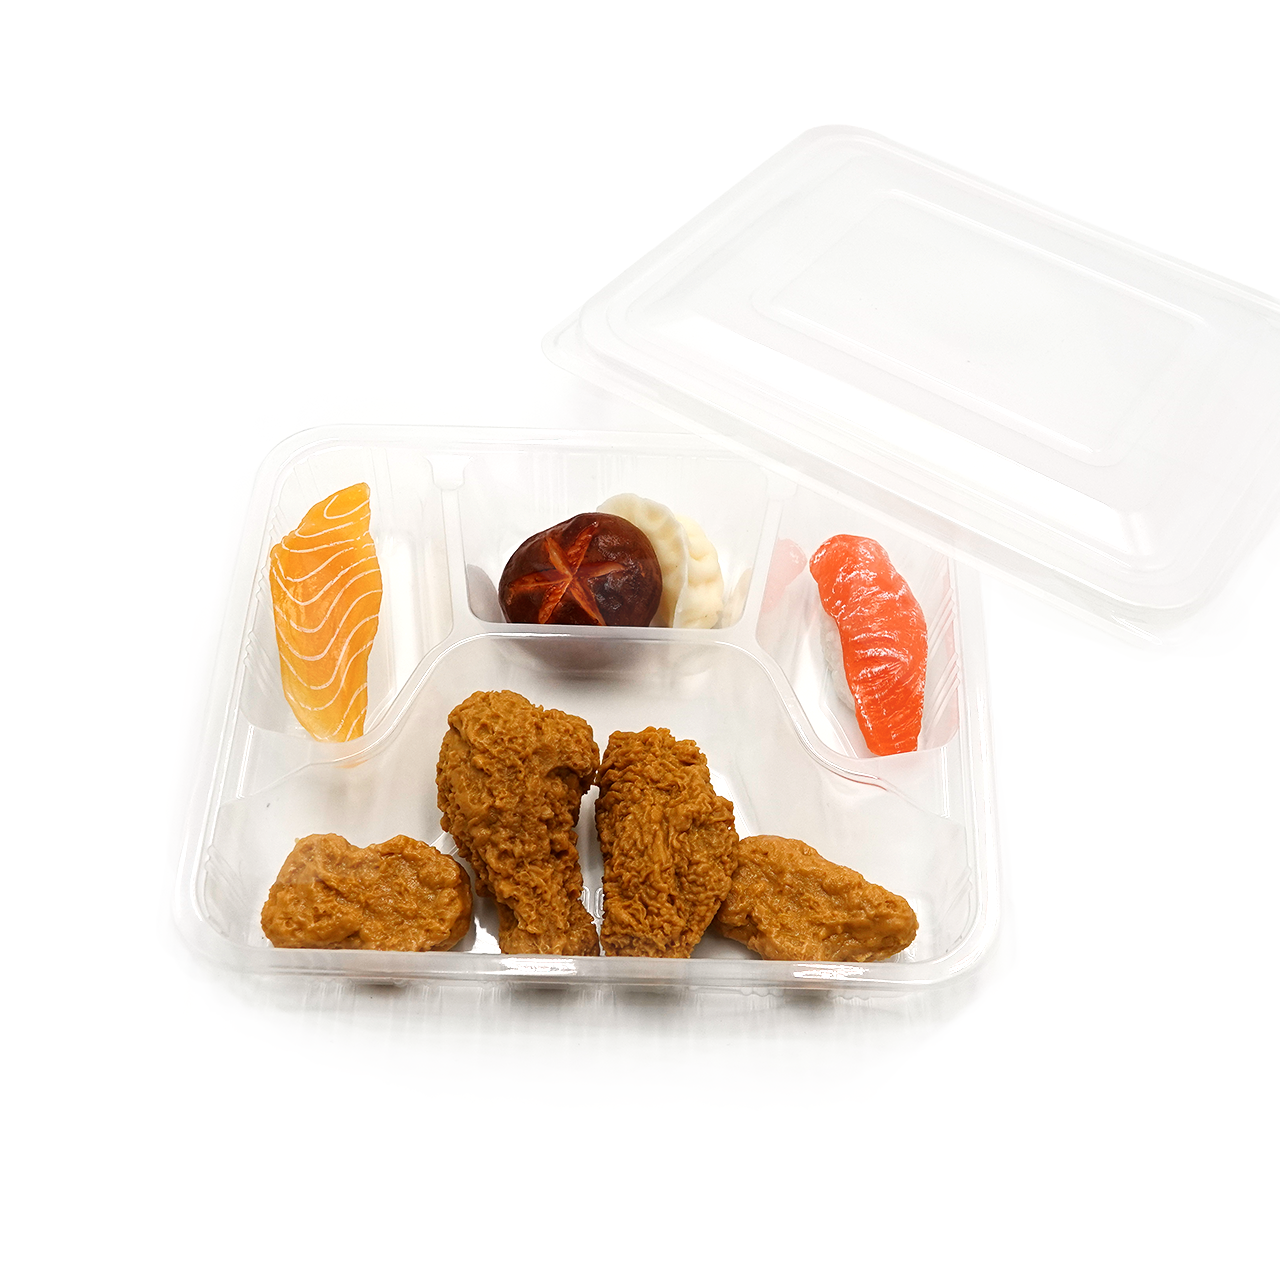 Disposable take out 4 compartments PP plastic meal prep container with leak prevention lid